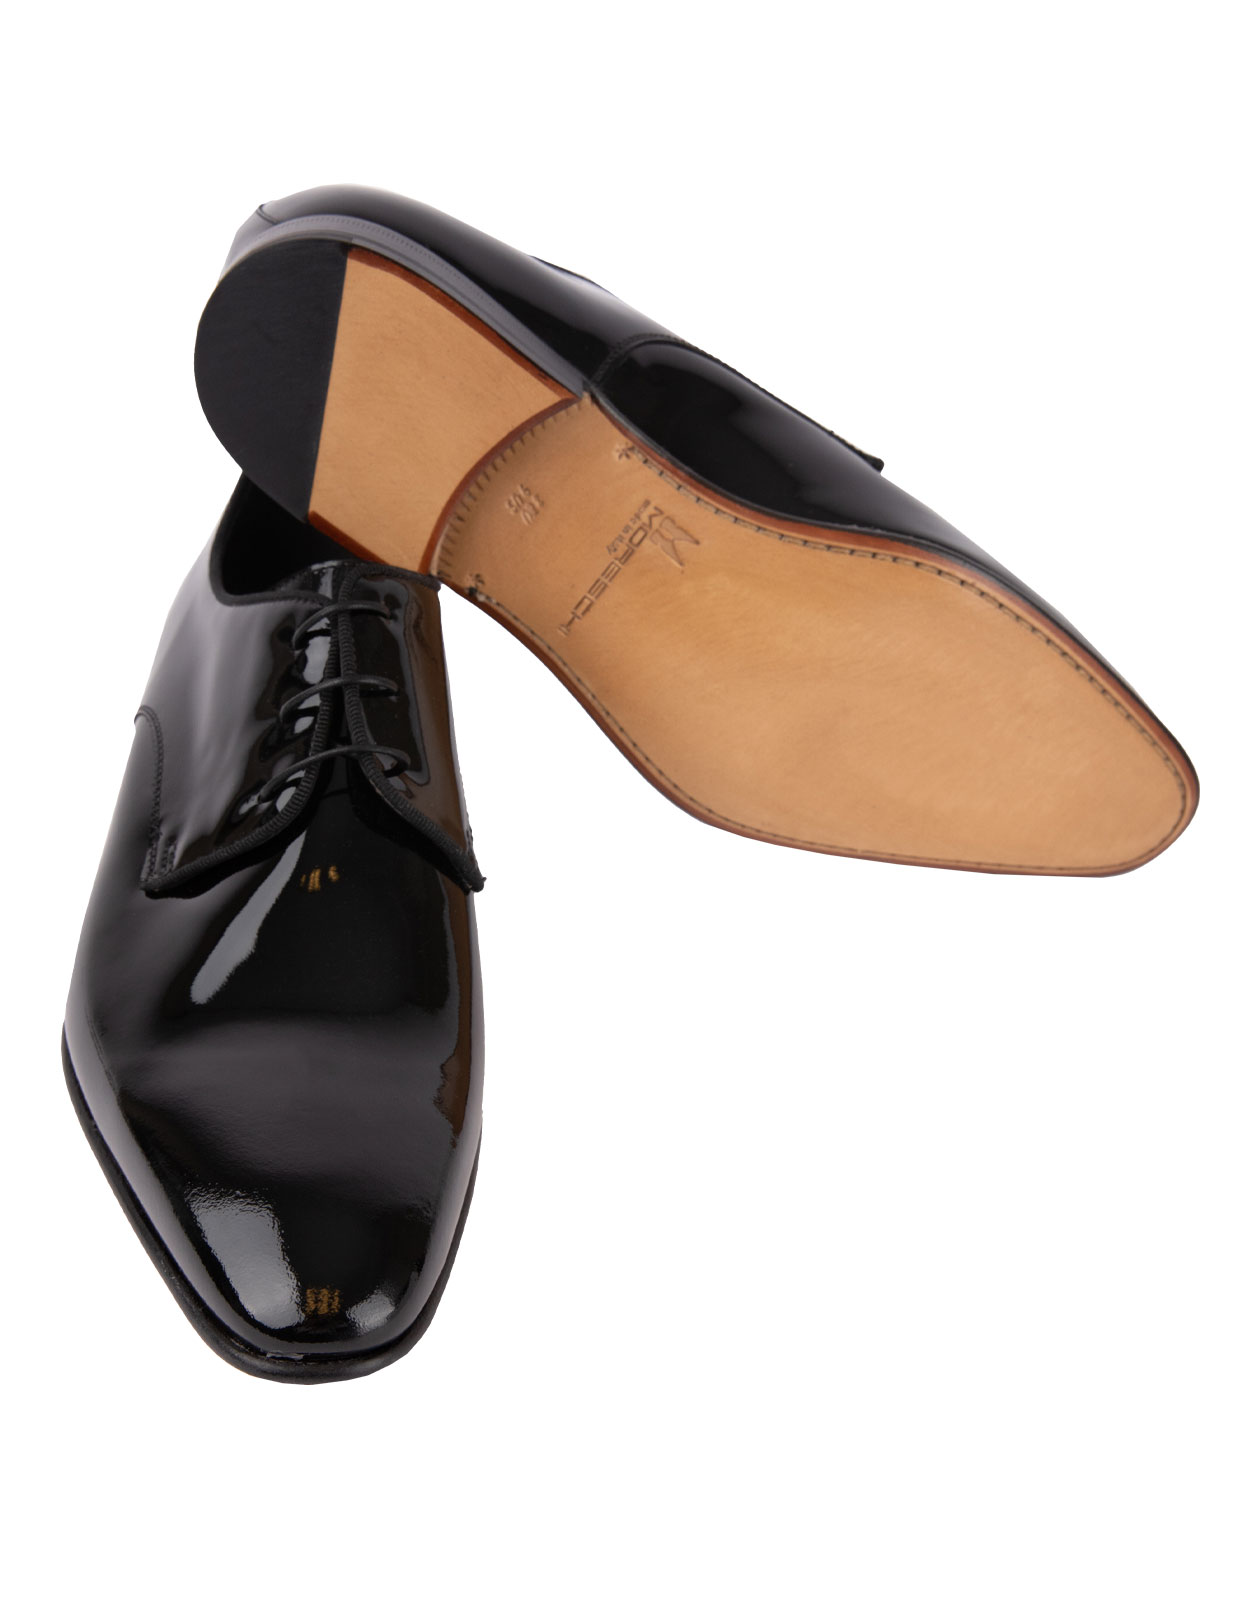 Lille Patent Leather Derby Shoes Black Stl 11